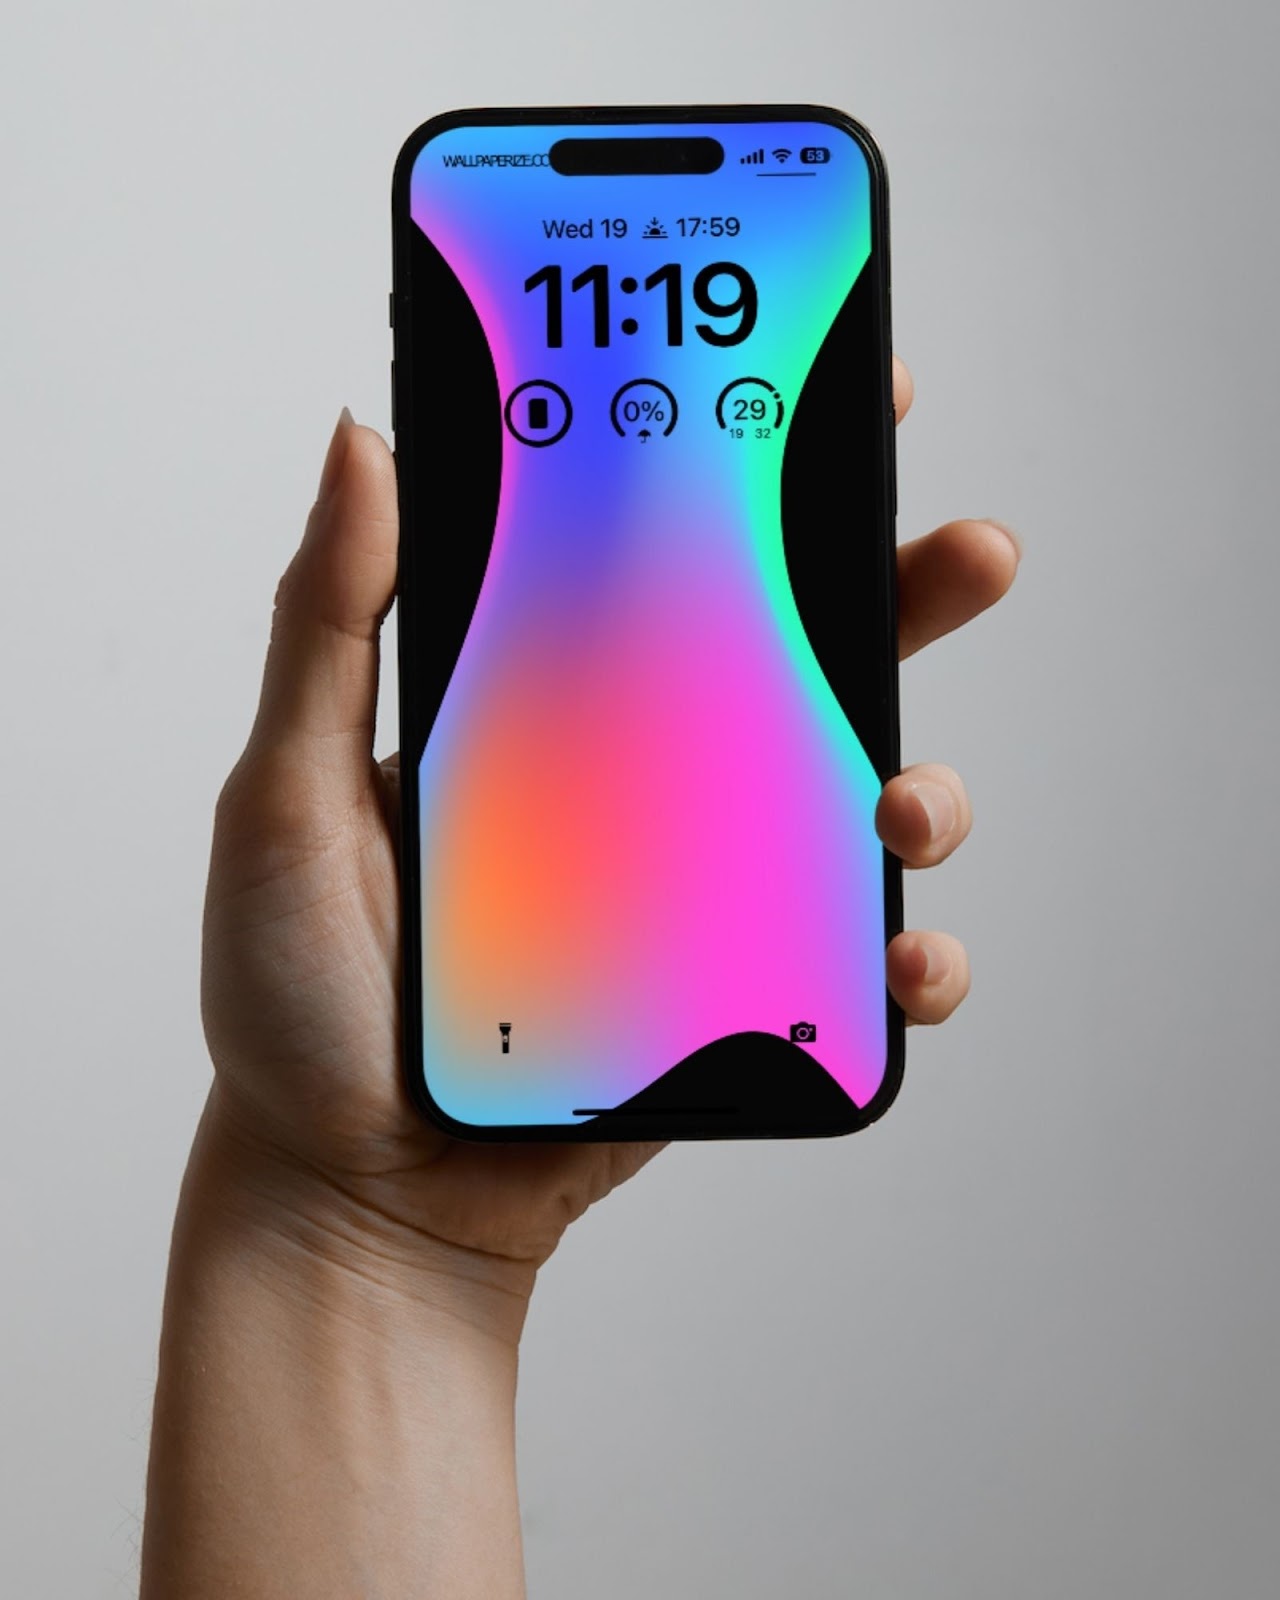 Ethereal Radiance: Aesthetic 4K Gradient Wallpaper Tailored for Your Singular Phone